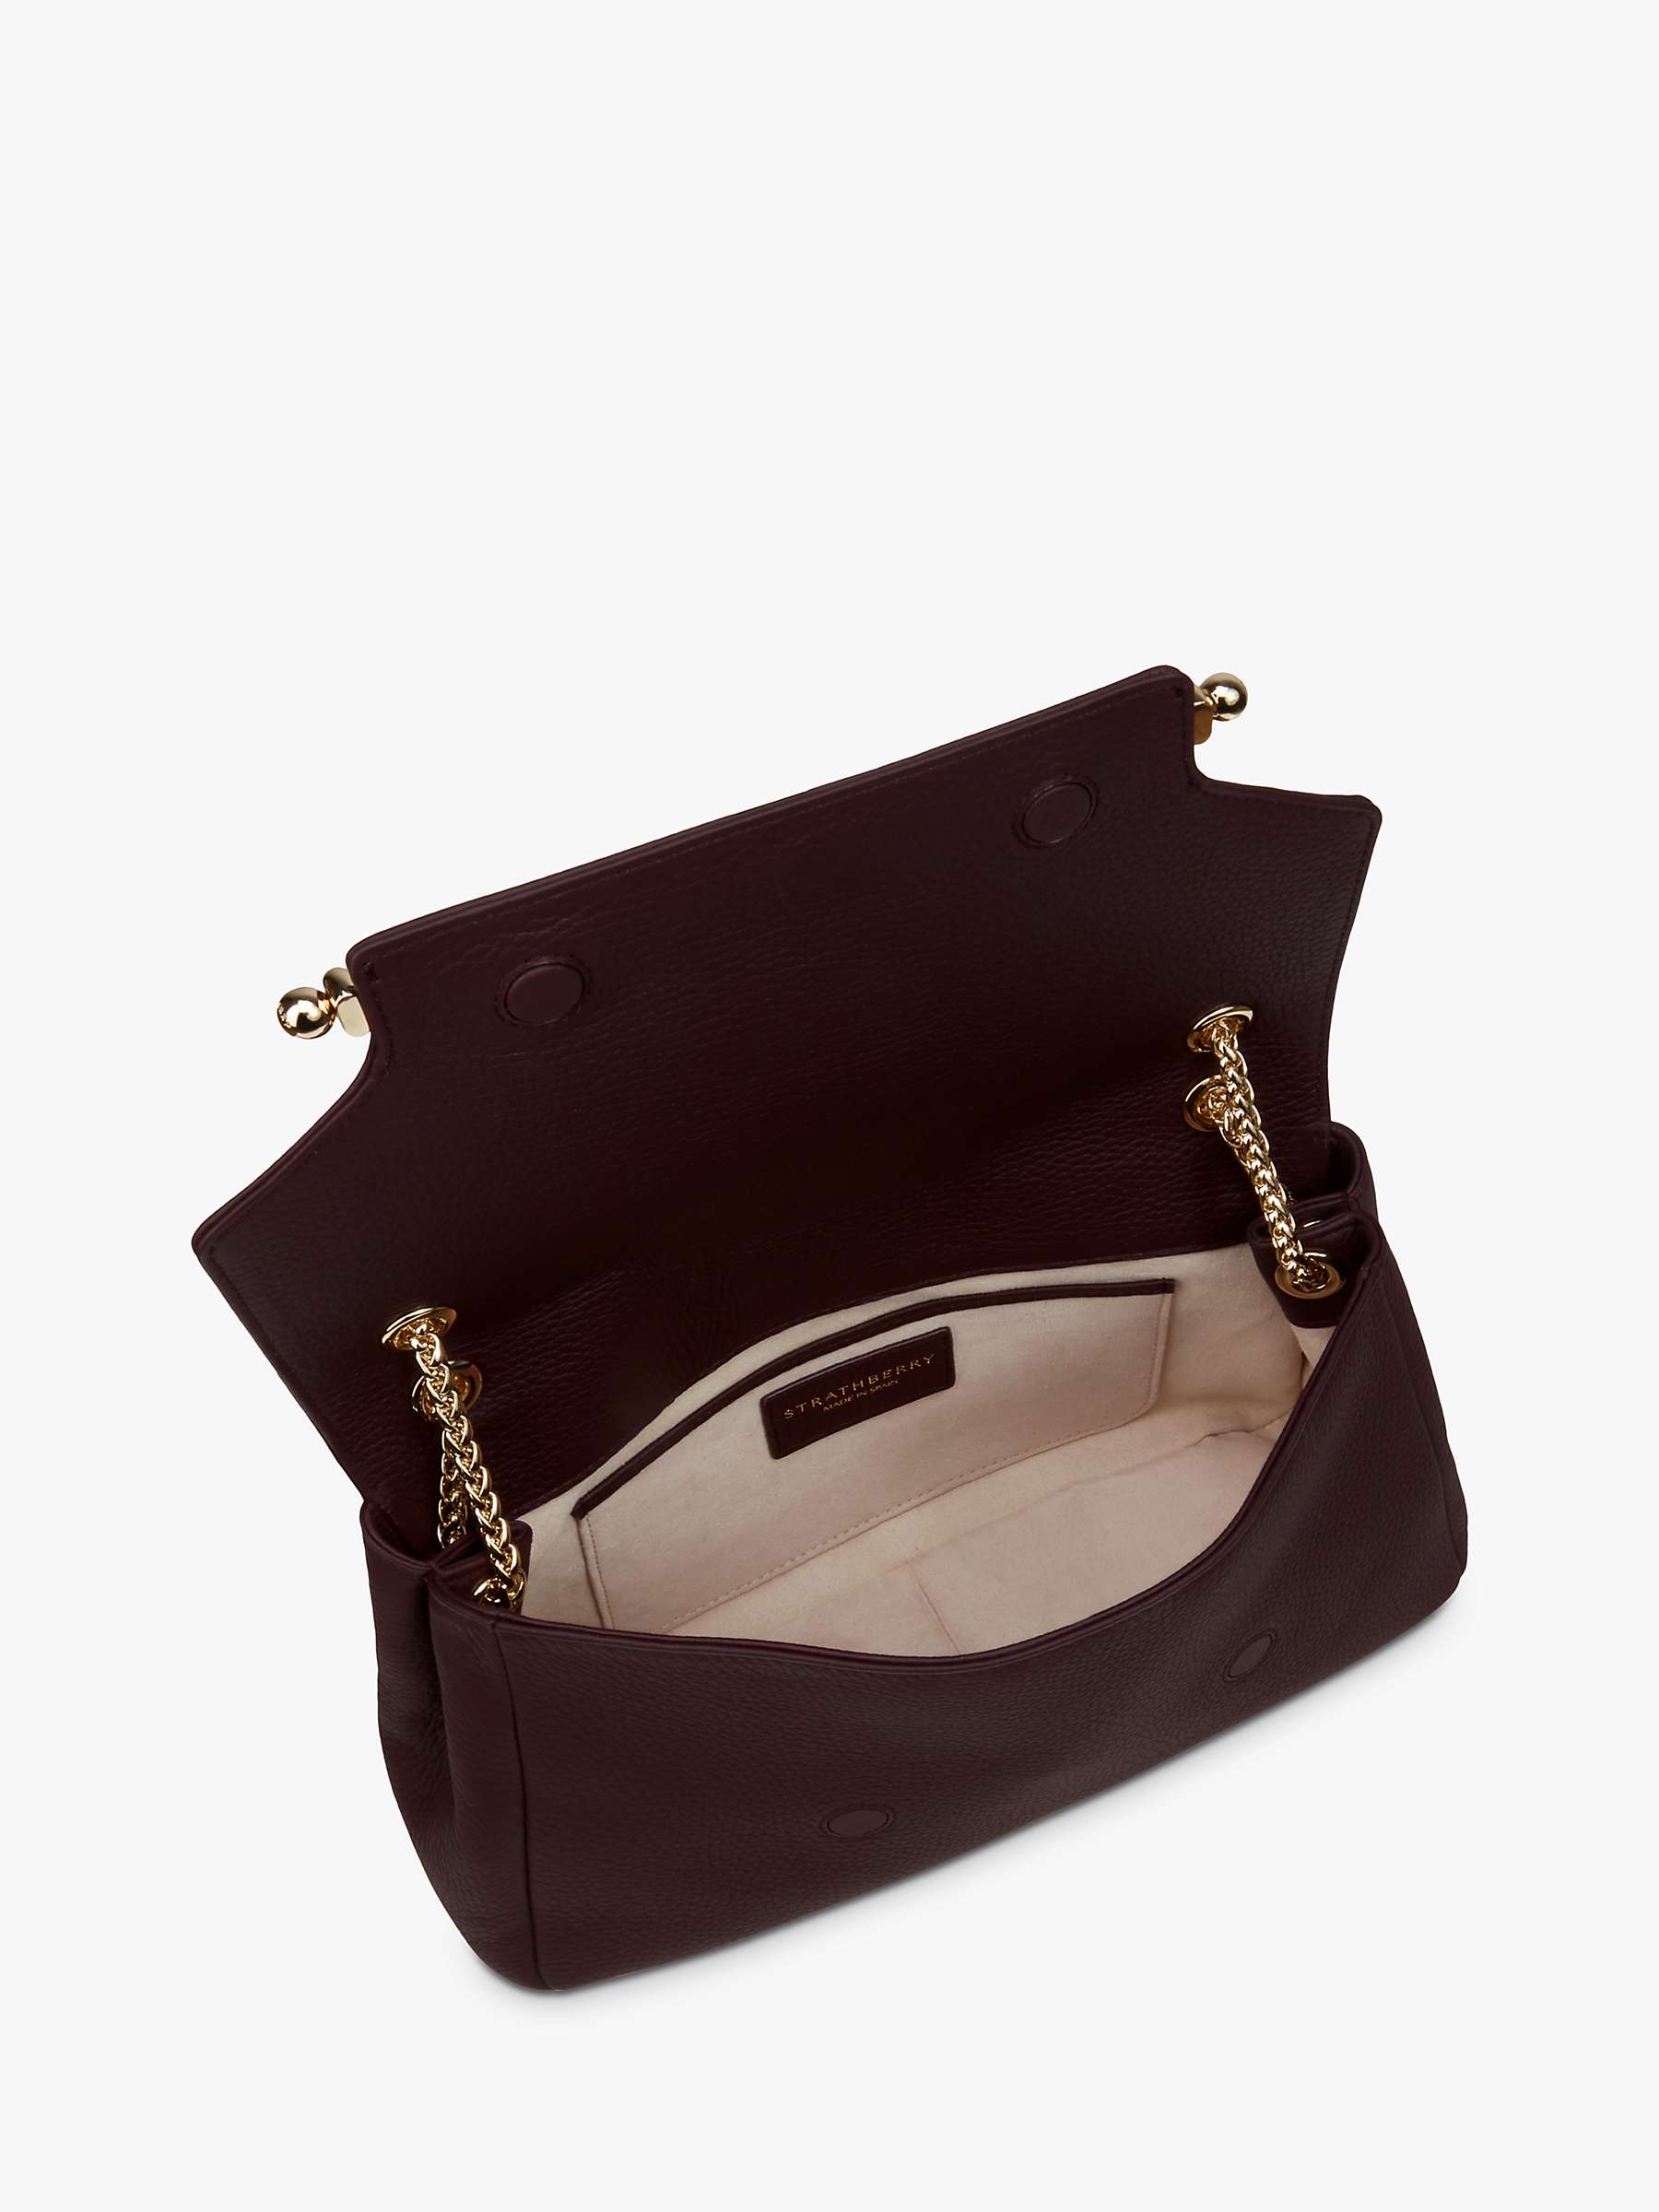 Buy Strathberry East/West Soft Leather Chain Strap Cross Body Bag Online at johnlewis.com